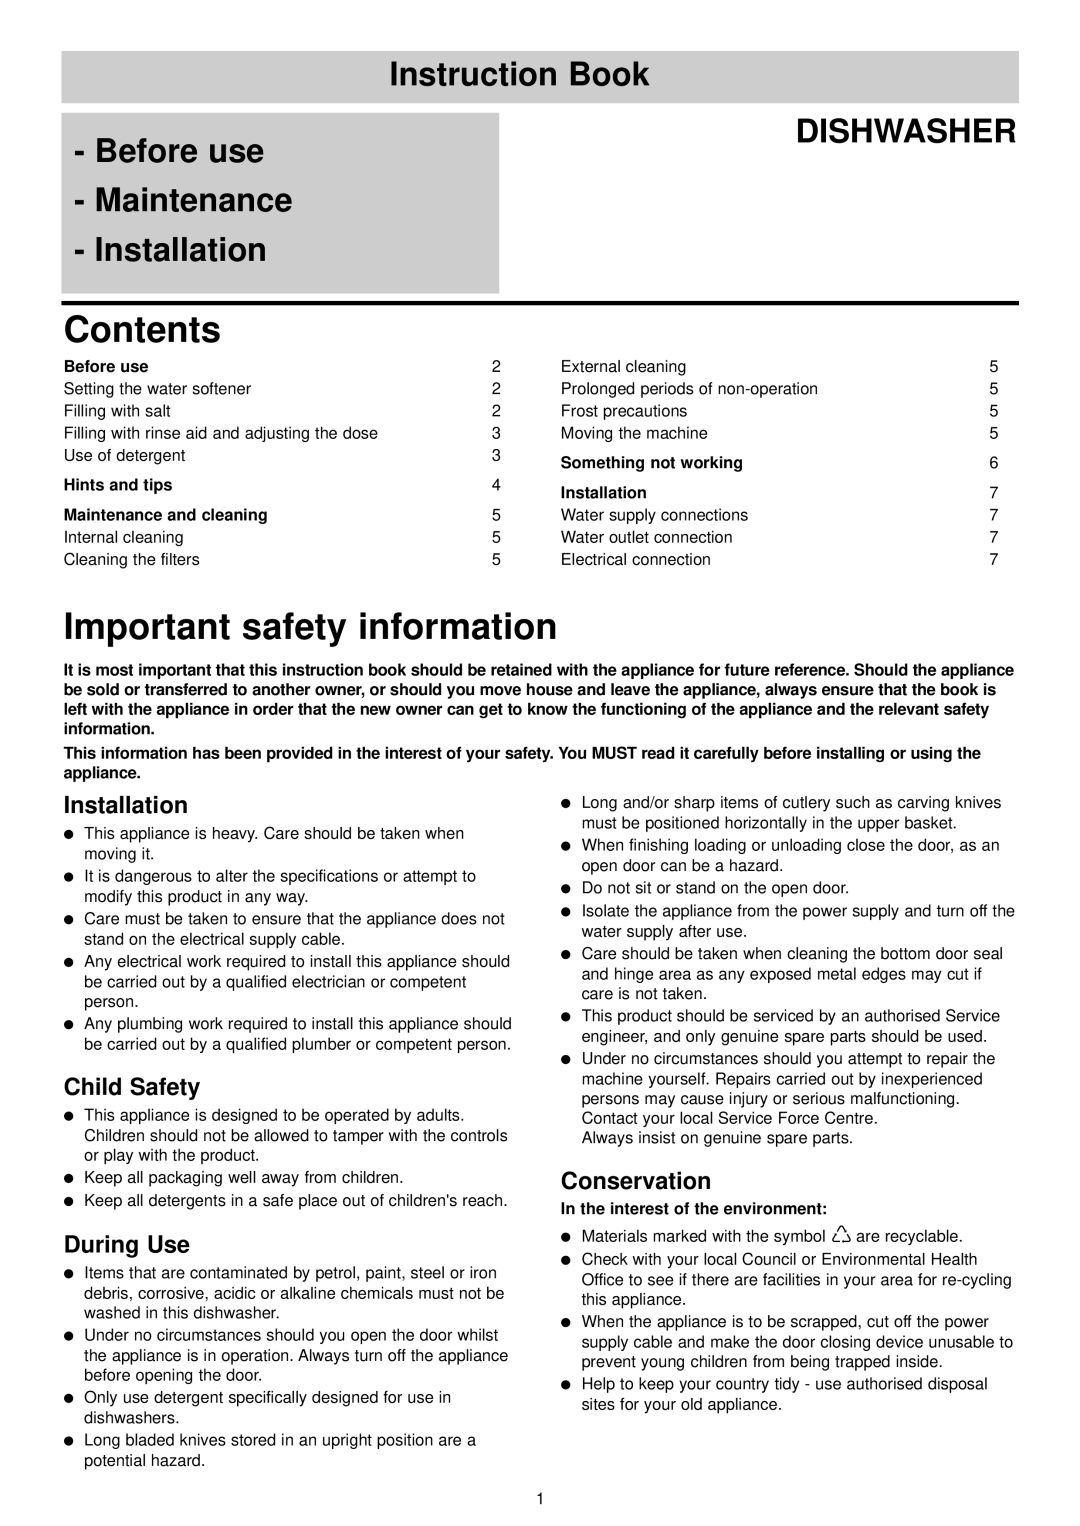 Zanussi DWS 909 Contents, Important safety information, Installation, Child Safety, During Use, Conservation, Dishwasher 